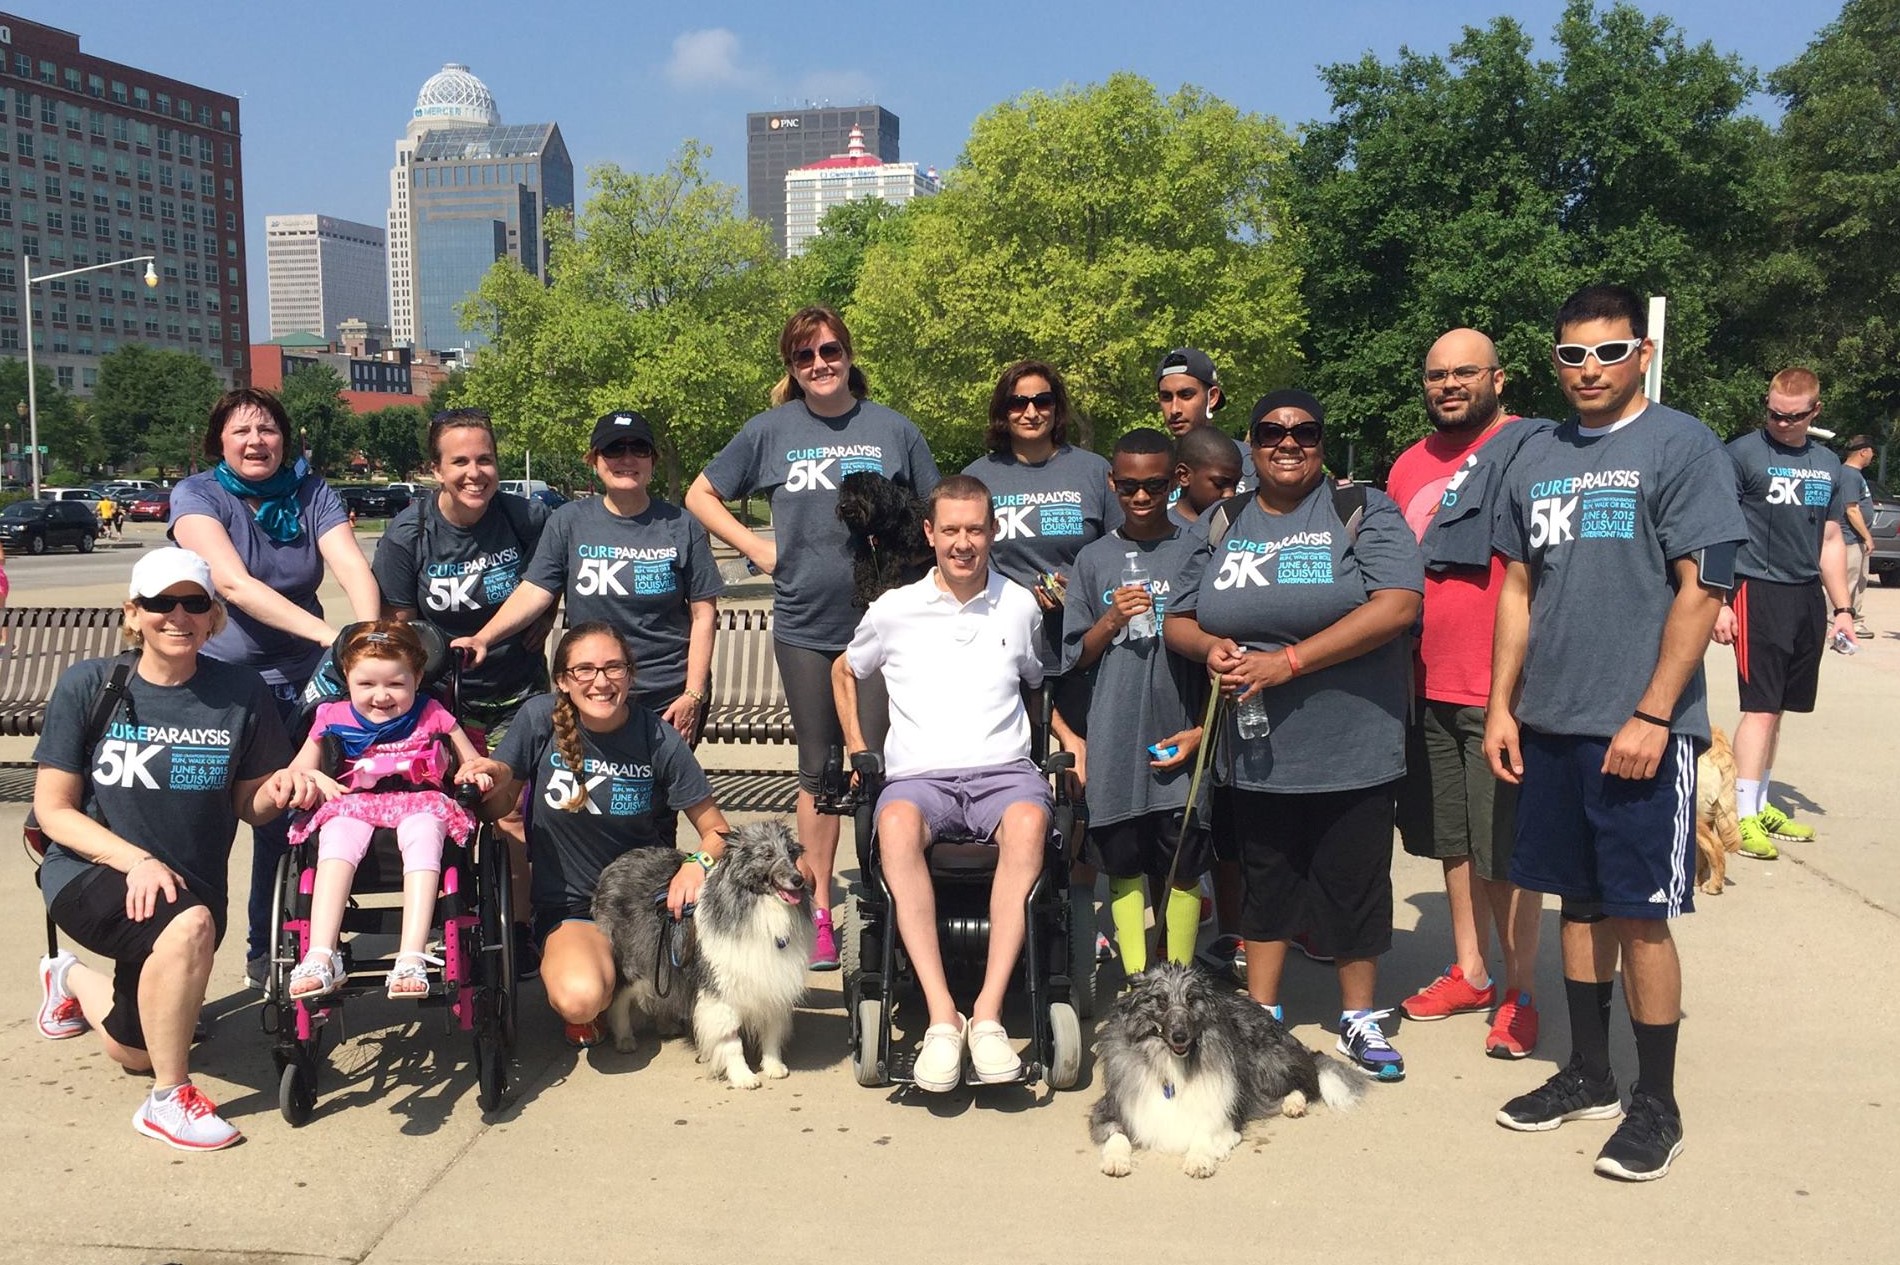 Todd Crawford, Center, with participants in the 5K to Cure Paralysis in 2015